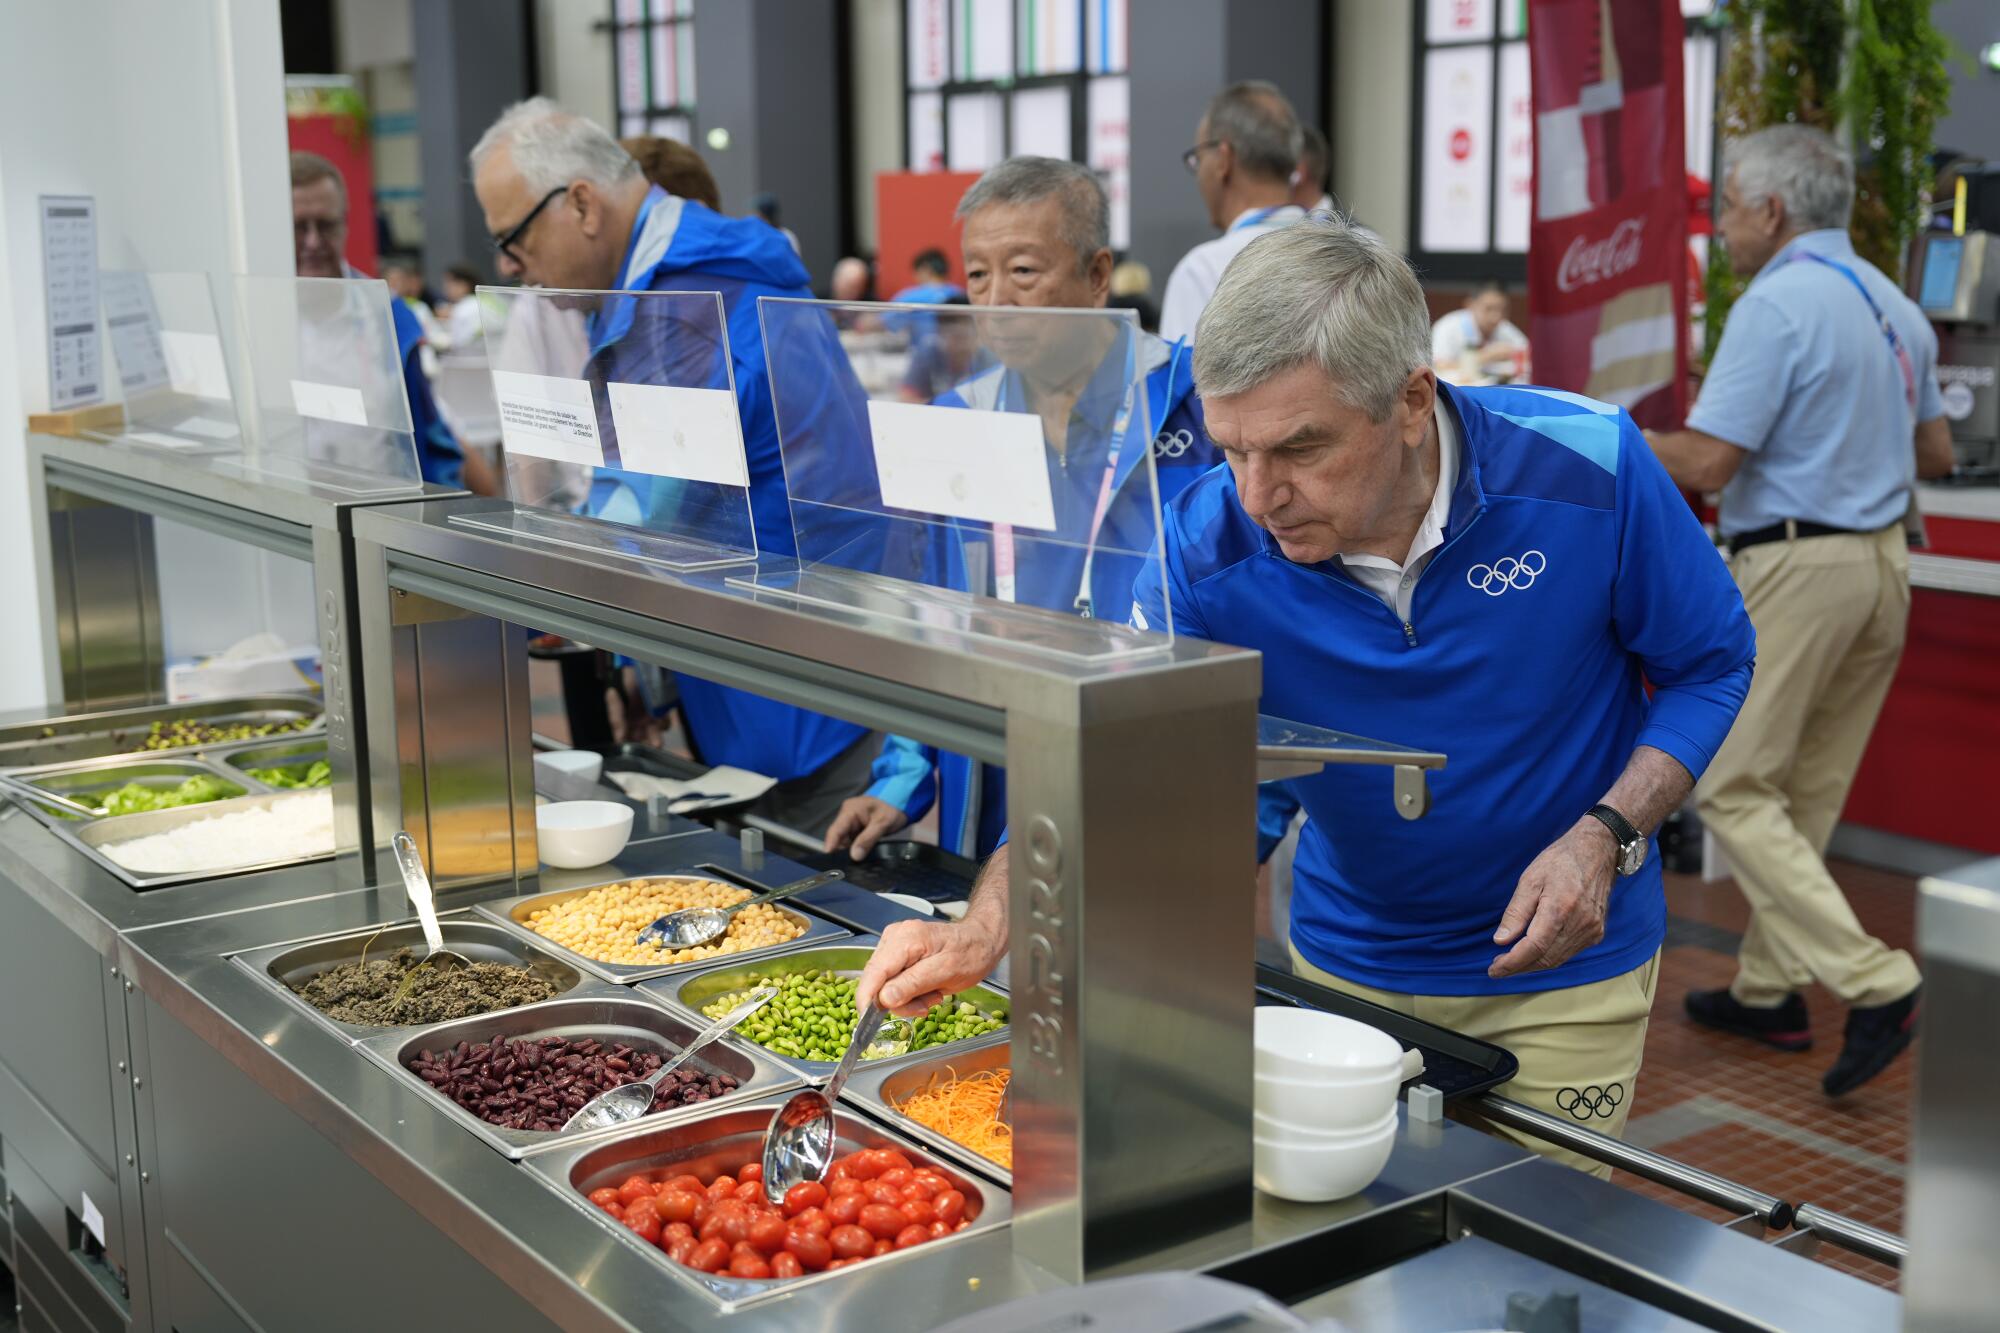 A man in blue uses a spoon to serve himself tomatoes at a salad bar.